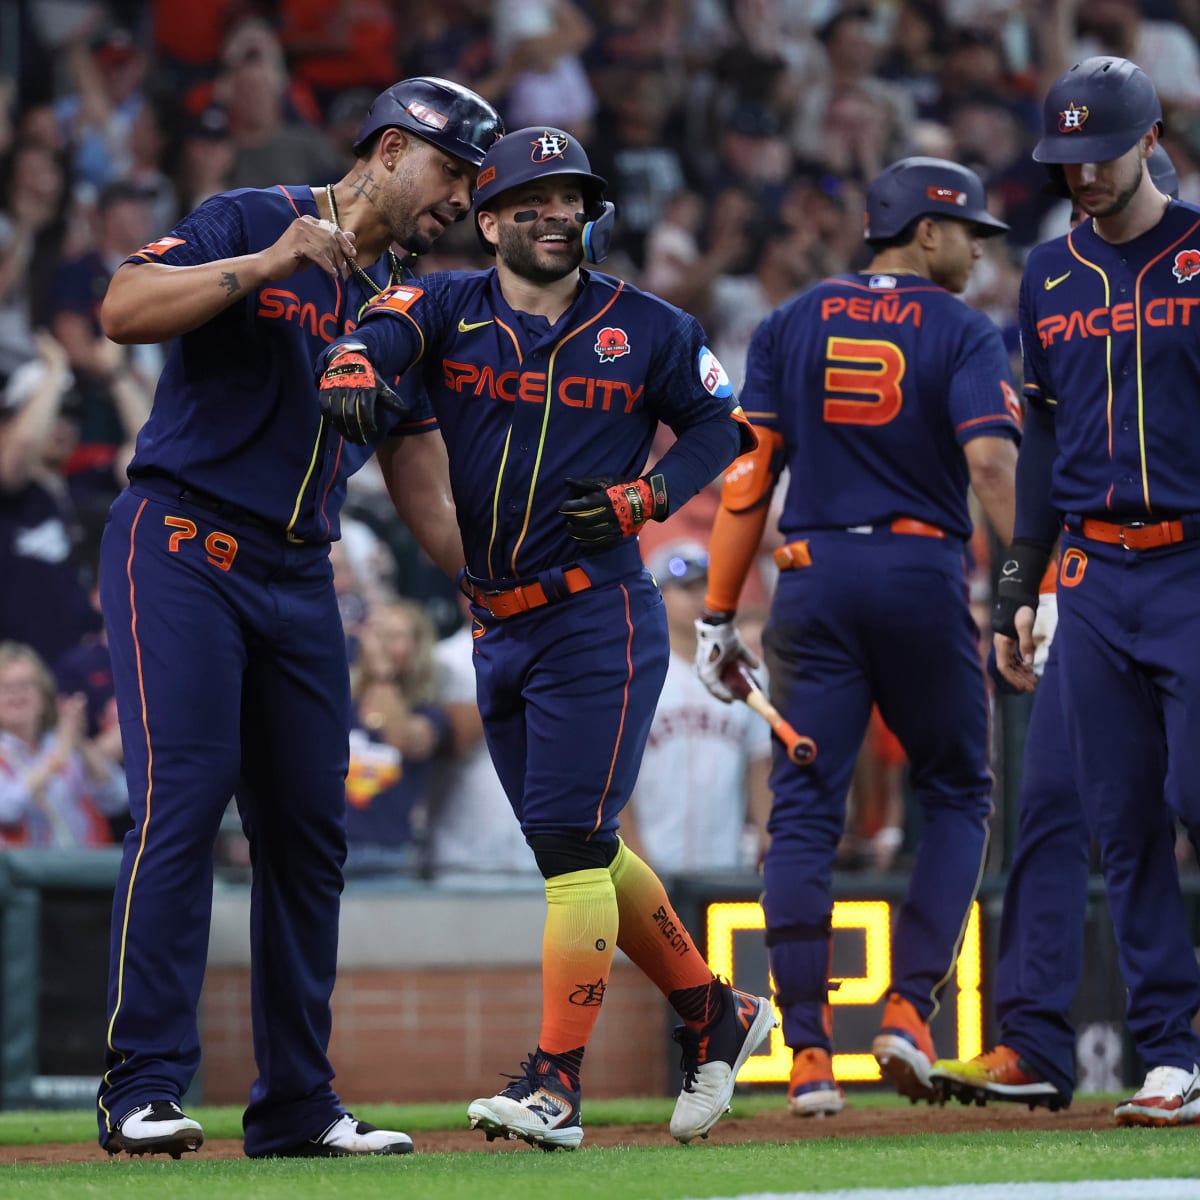 MLB on X: José Abreu drives in 7 runs as the @Astros complete the